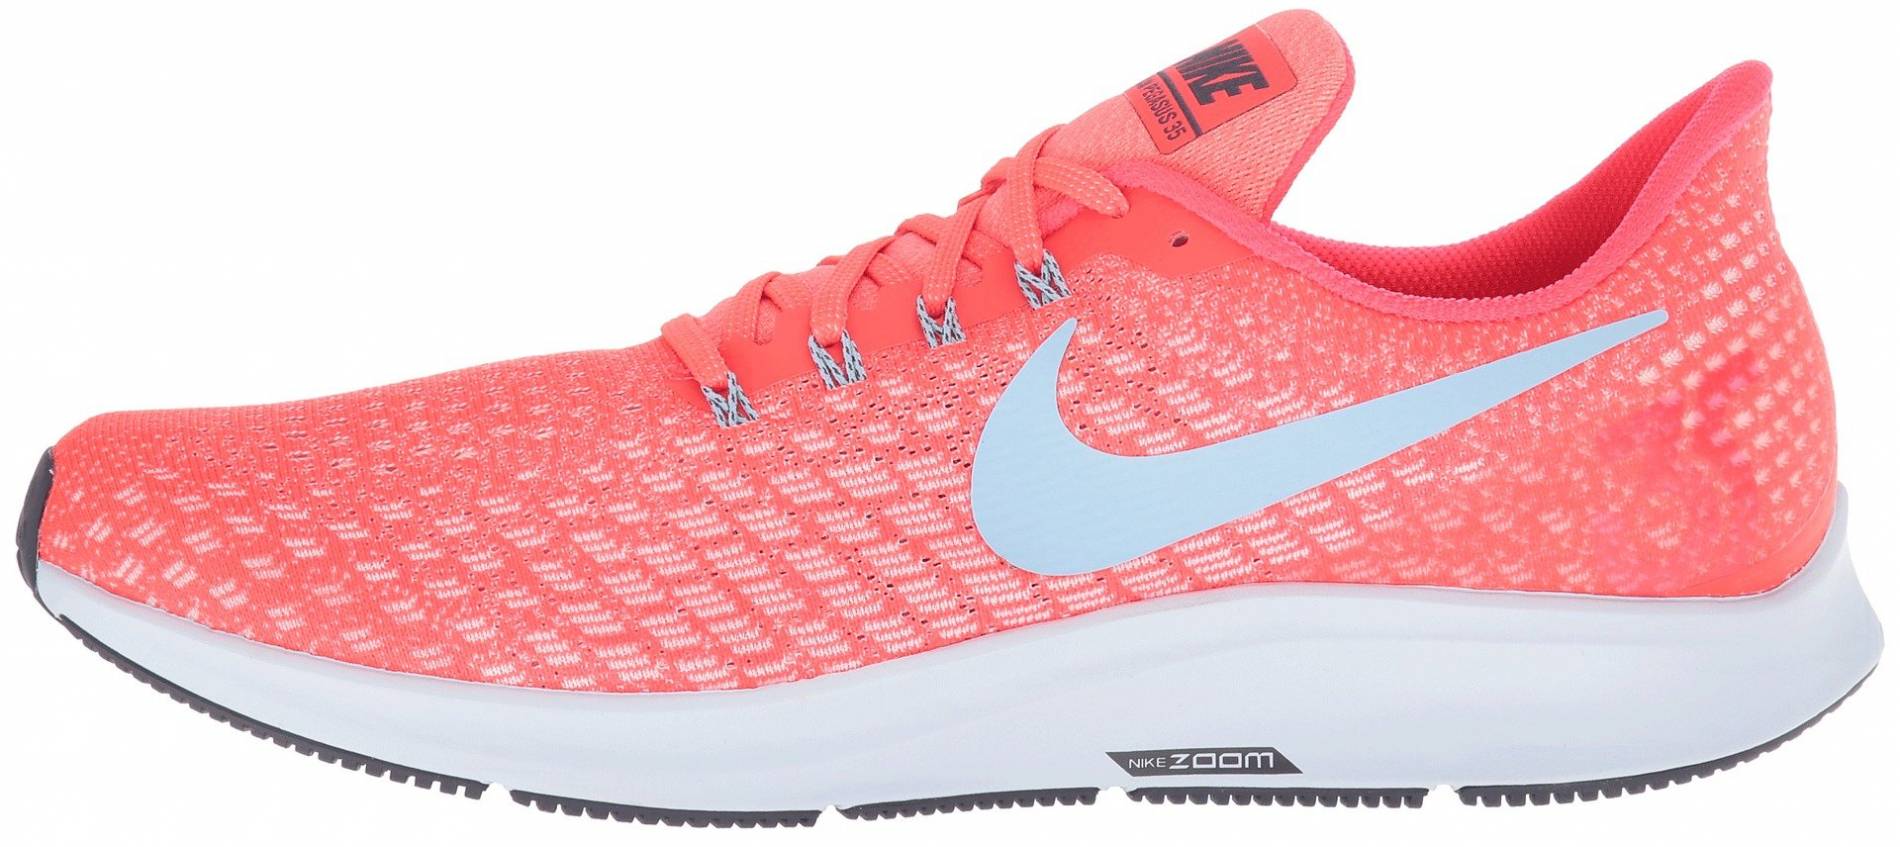 Save 43% on Nike Running Shoes (246 